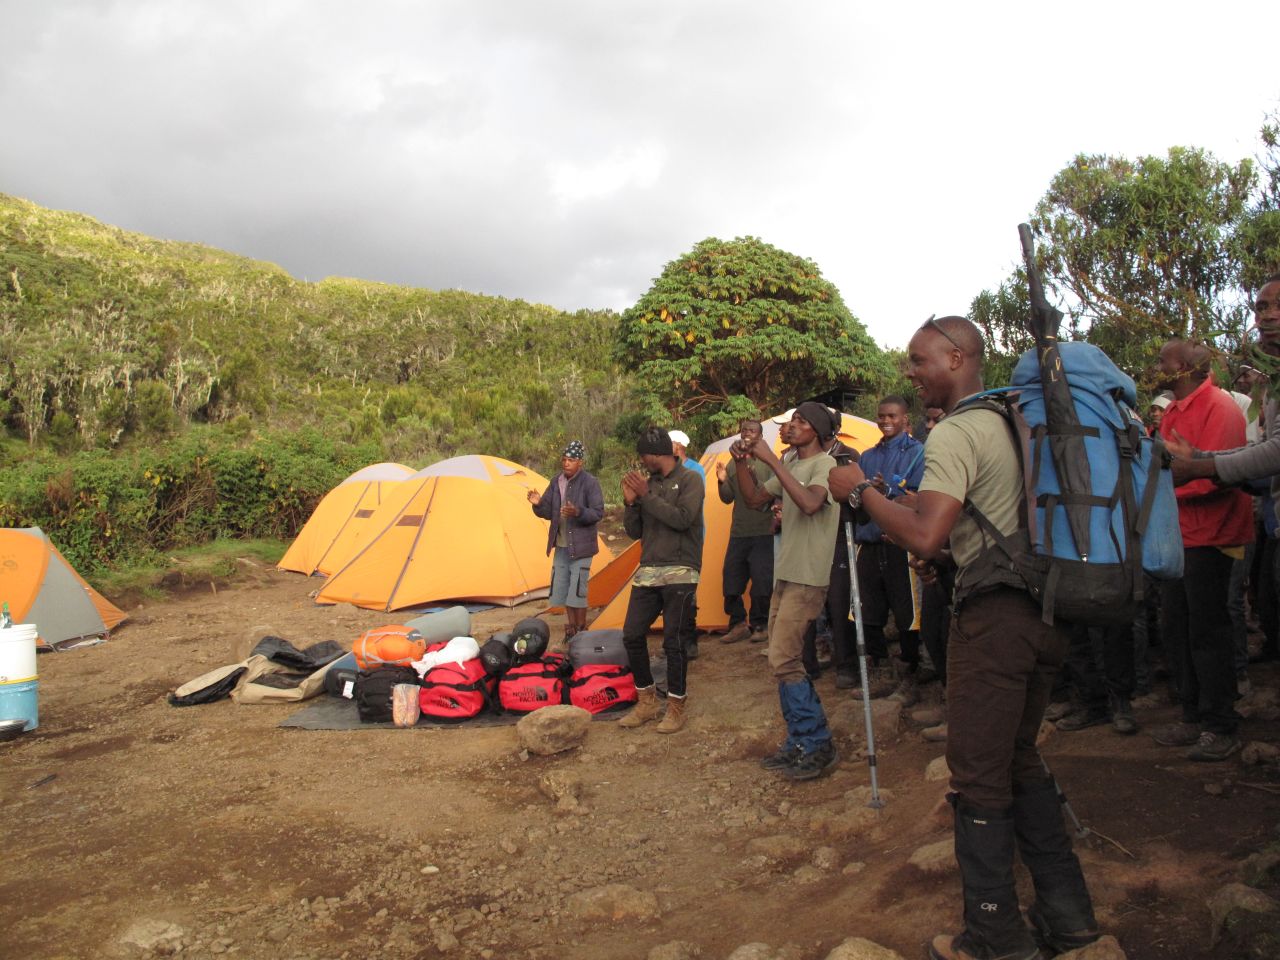 On Day One, the porters and guides welcome the group to their first camp after six-and-a-half hours of hiking. It was an emotional arrival for CNN anchor Brooke Baldwin.